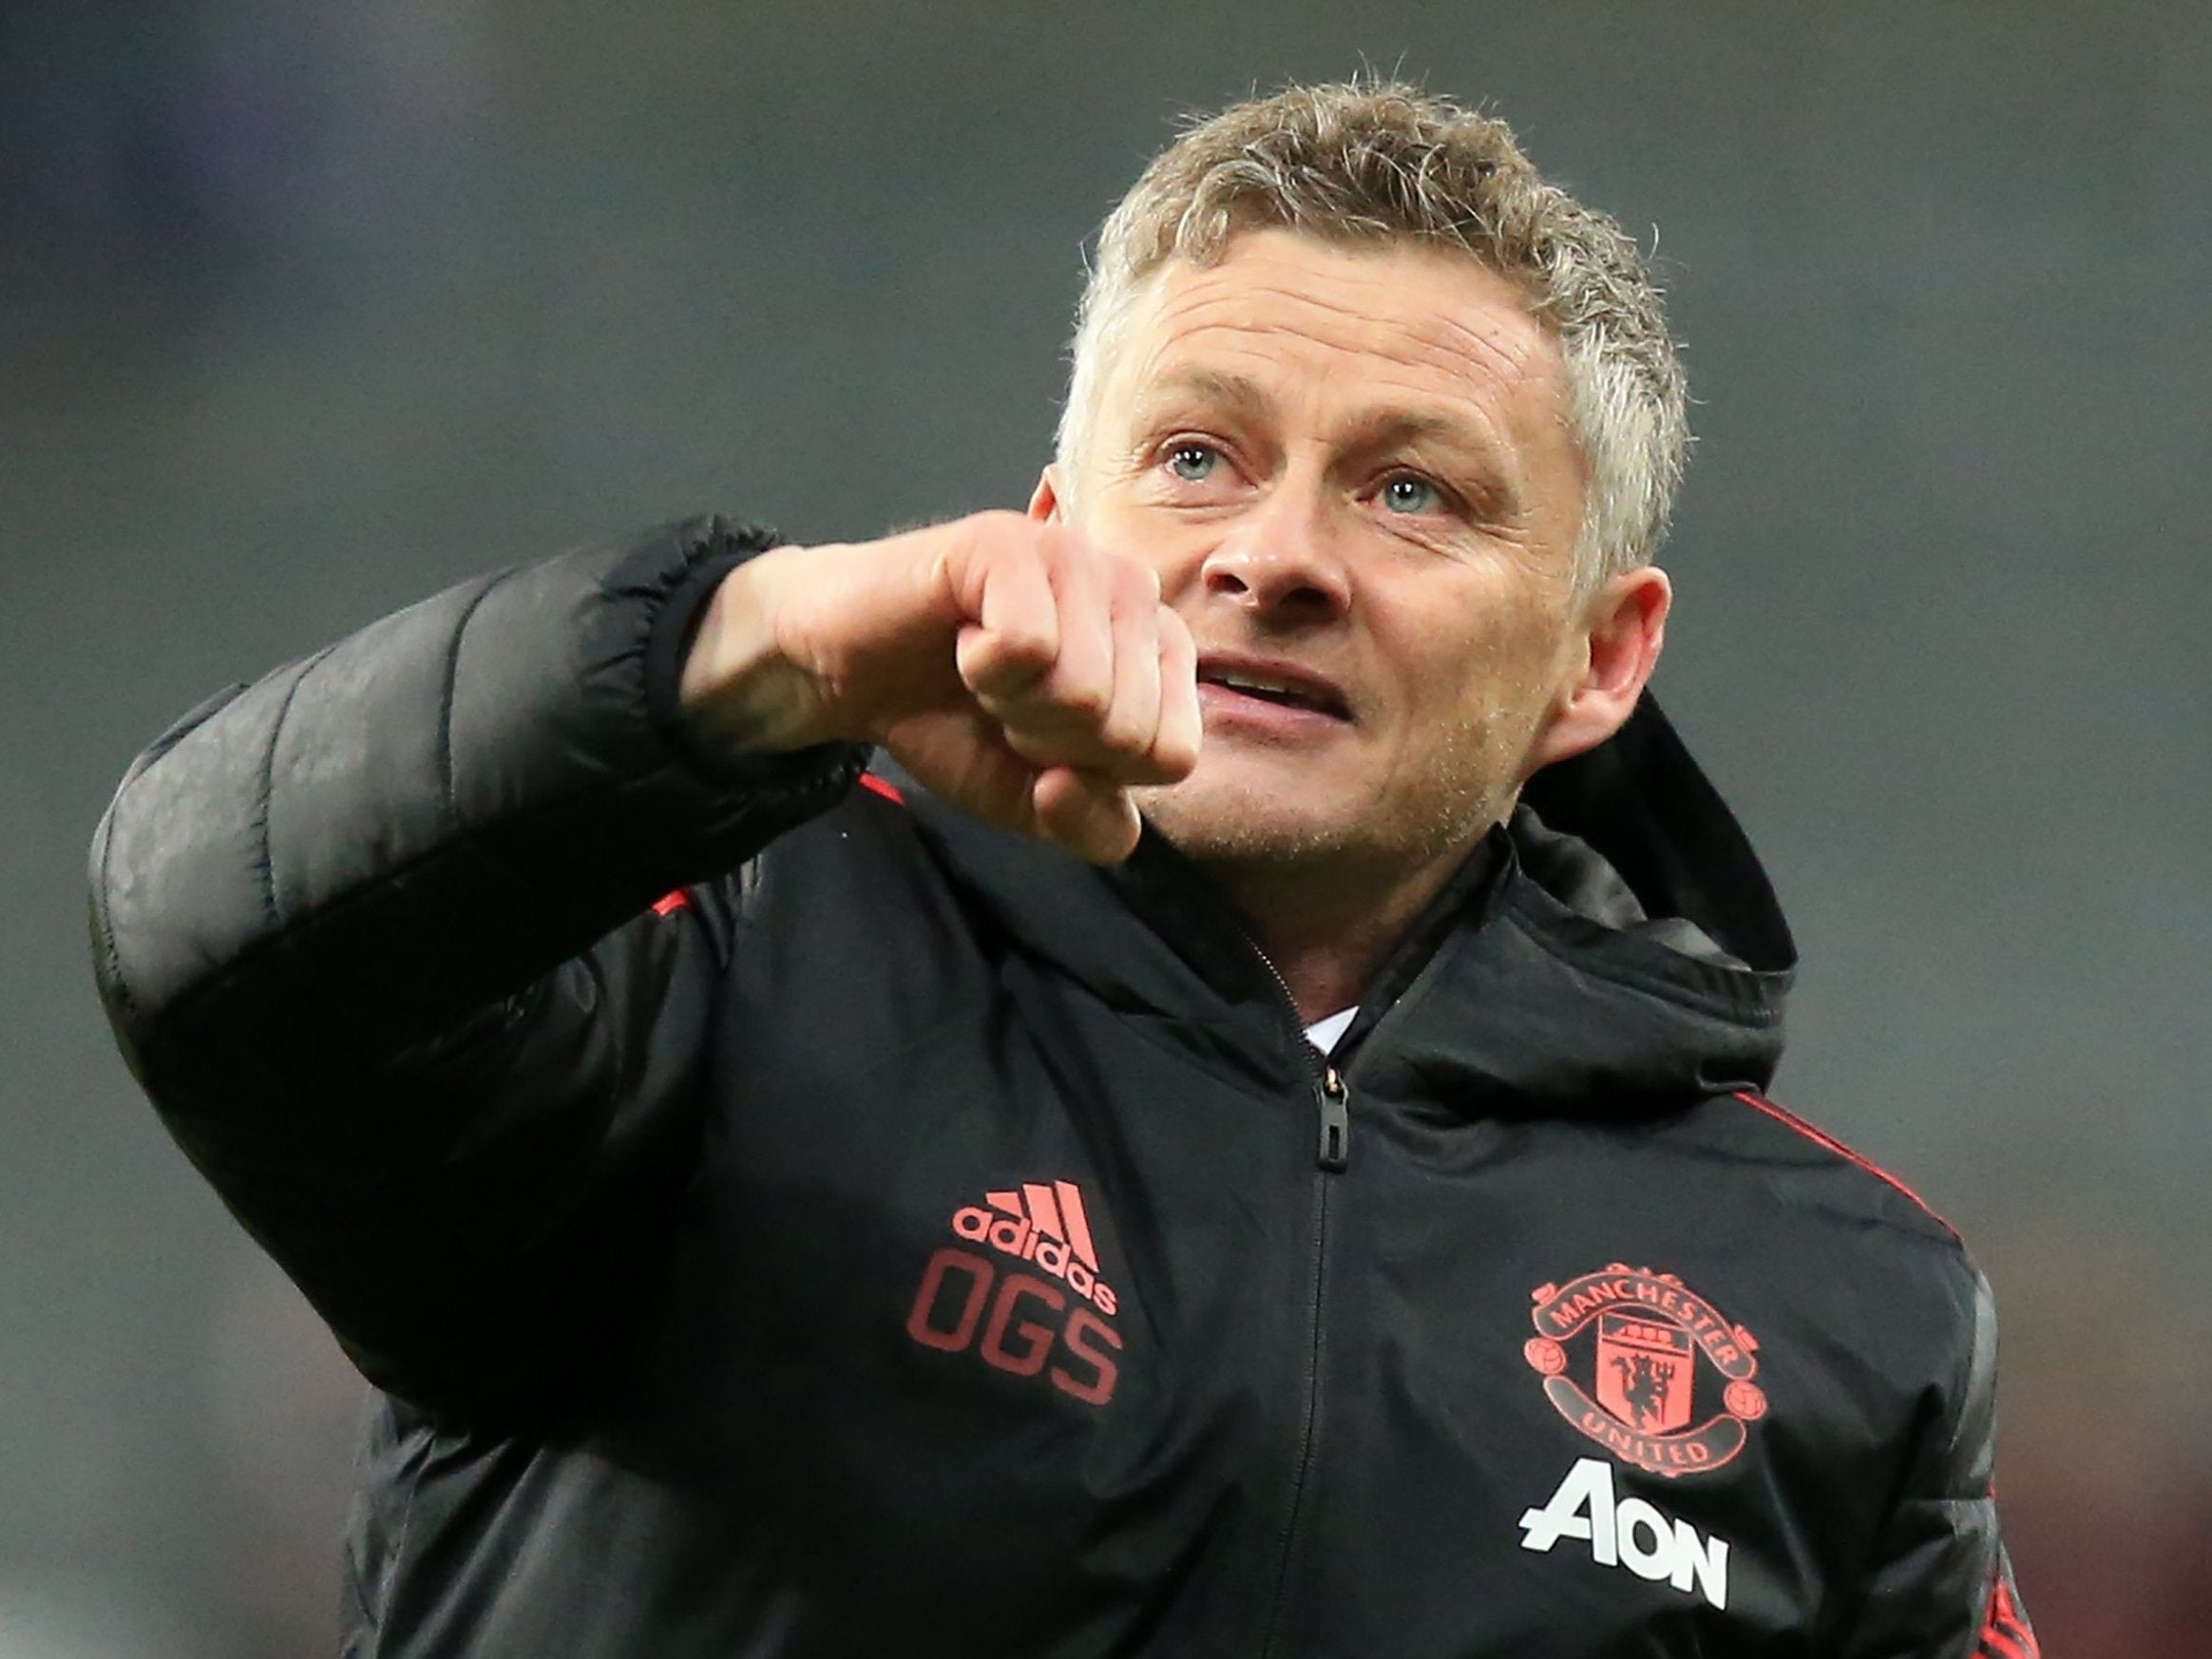 Ole Gunnar Solskjaer celebrated a fourth win as Manchester United manager